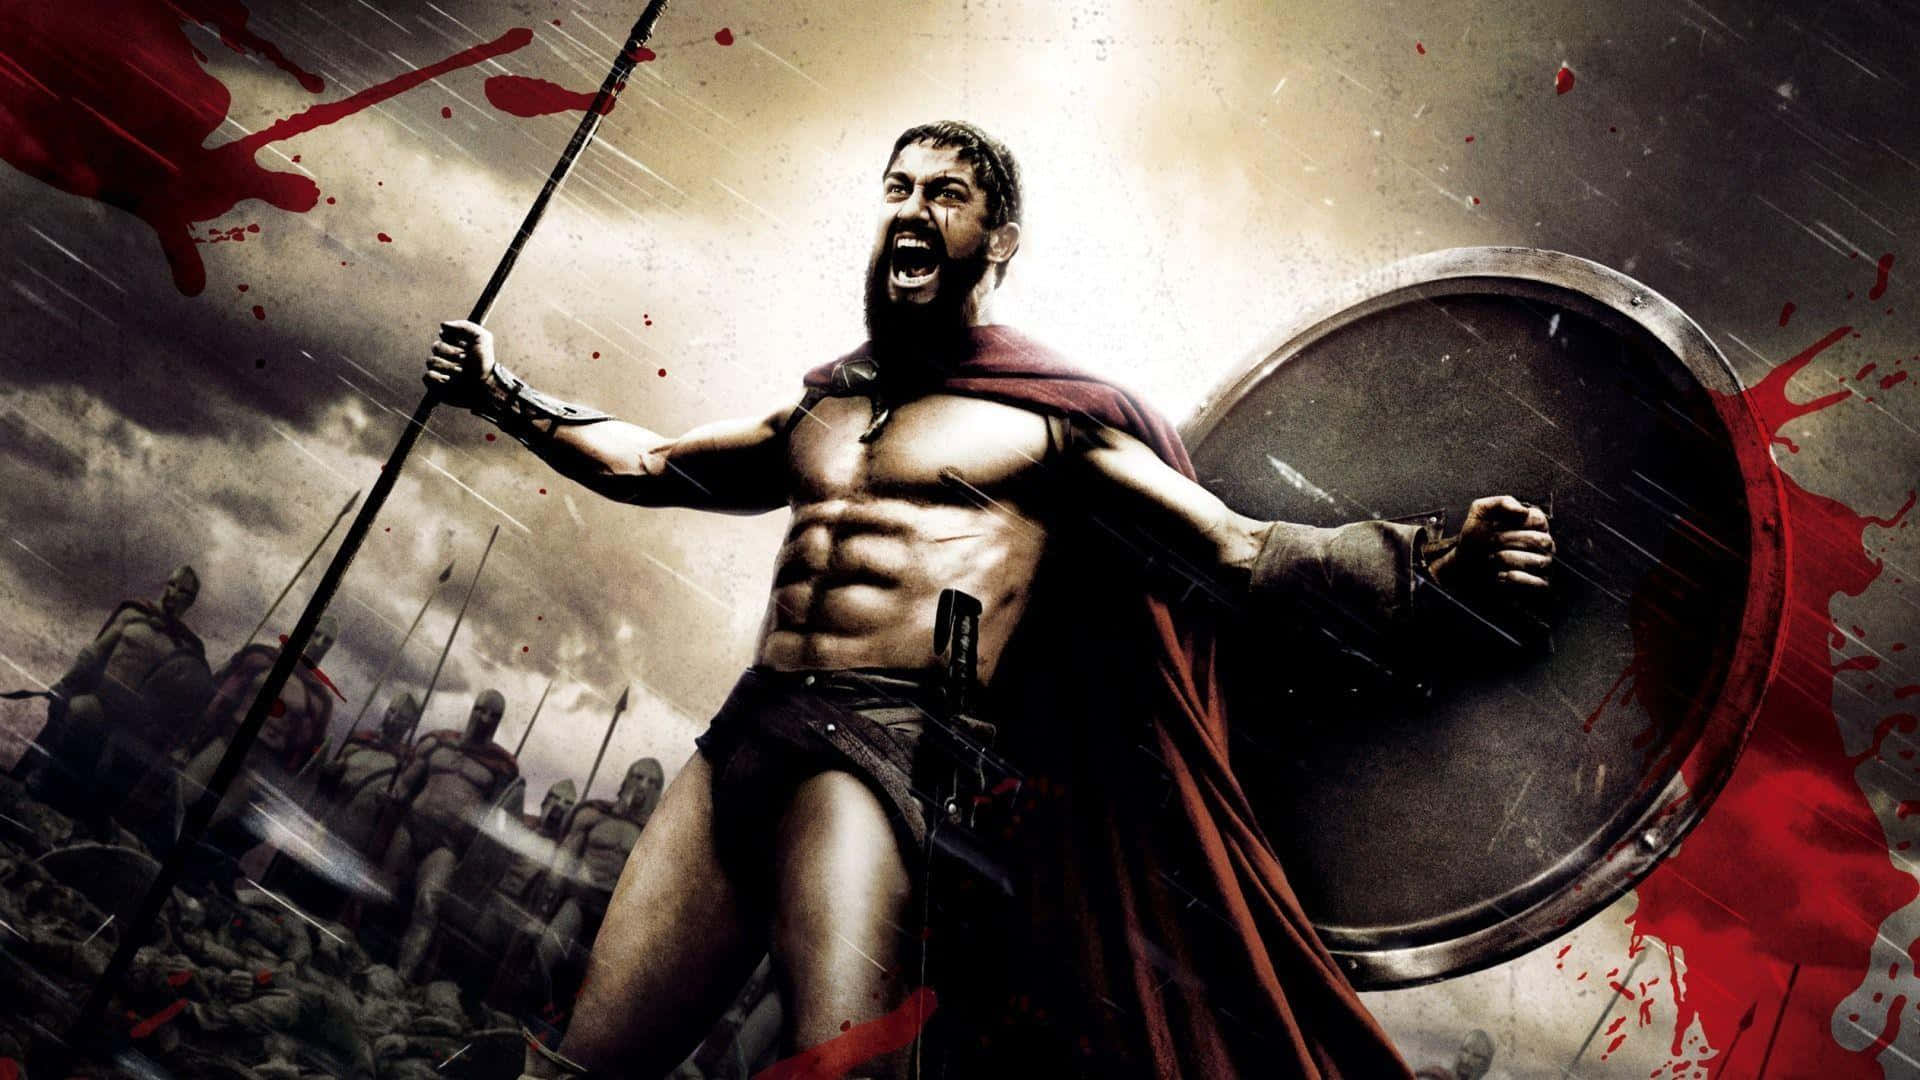 Brave warriors of Sparta ready for battle in the film 300 Wallpaper